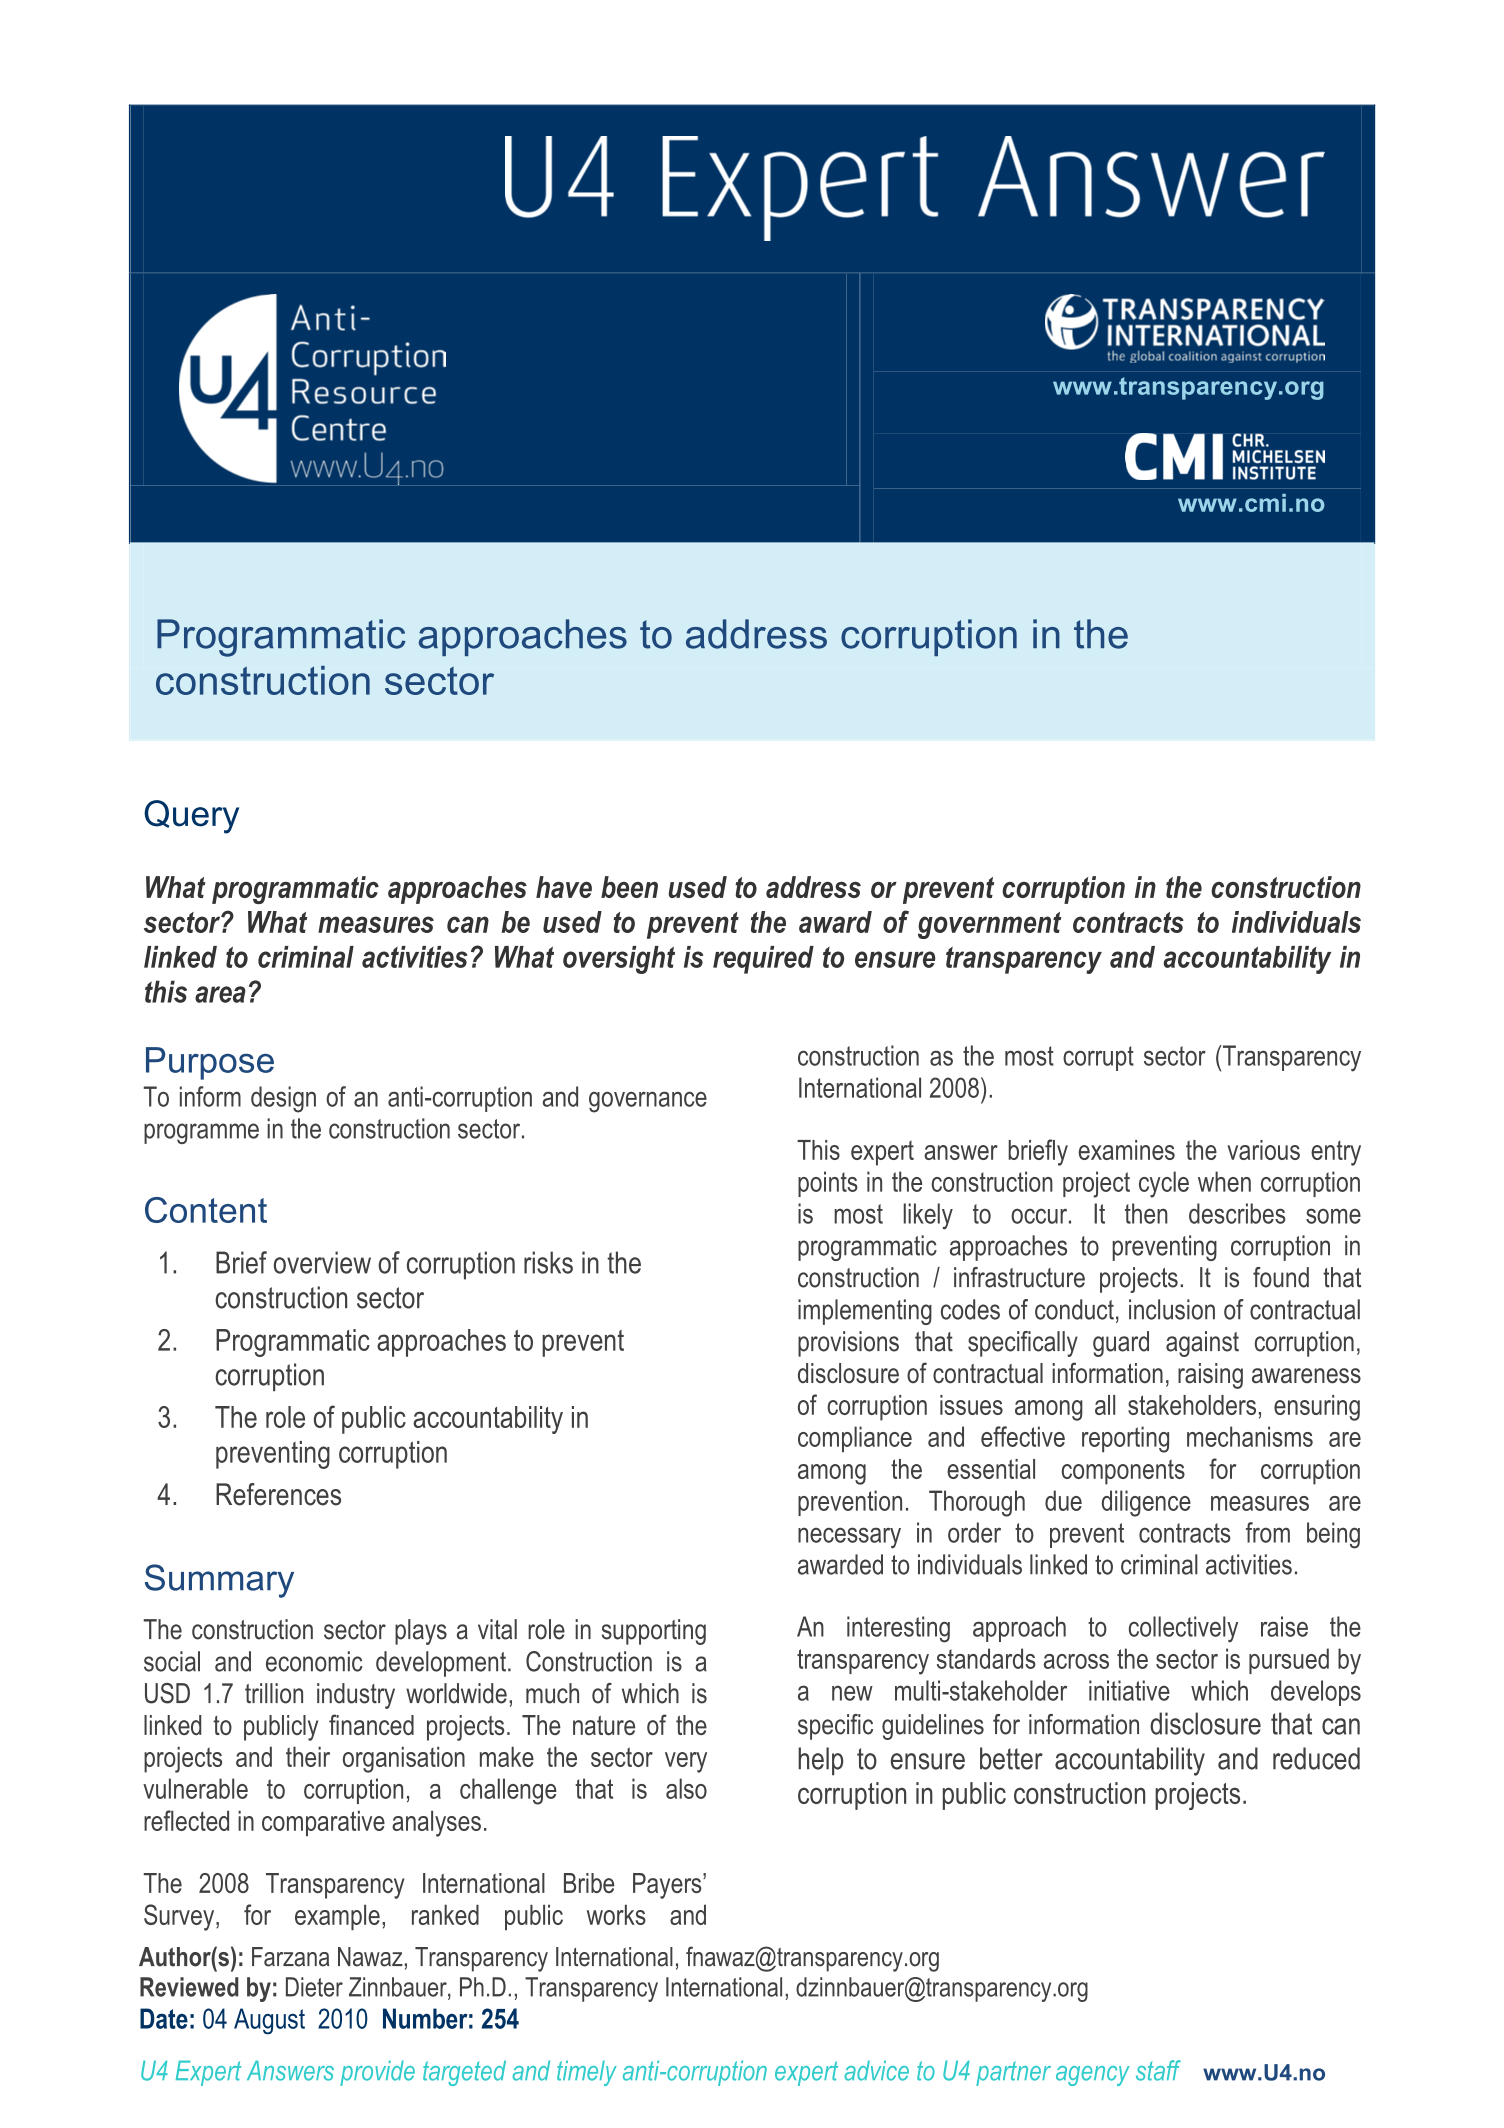 Programmatic approaches to address corruption in the construction sector 